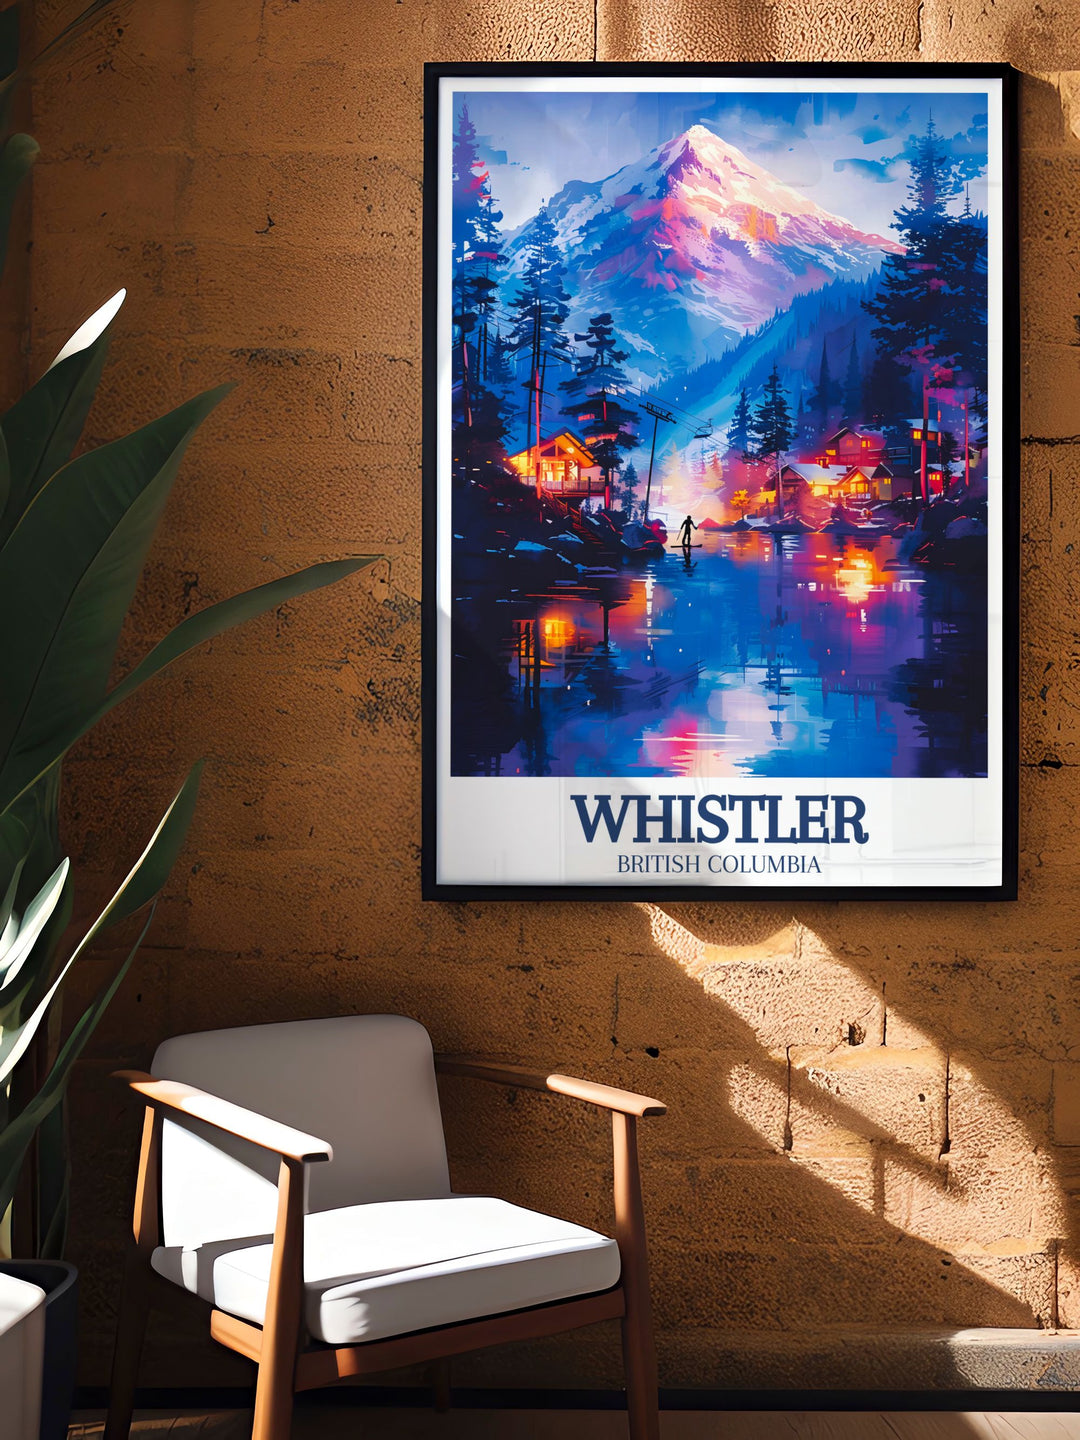 Coast Mountains artwork transforming your home into a tribute to nature with its captivating scenery and vibrant colors perfect for adventurers and art enthusiasts